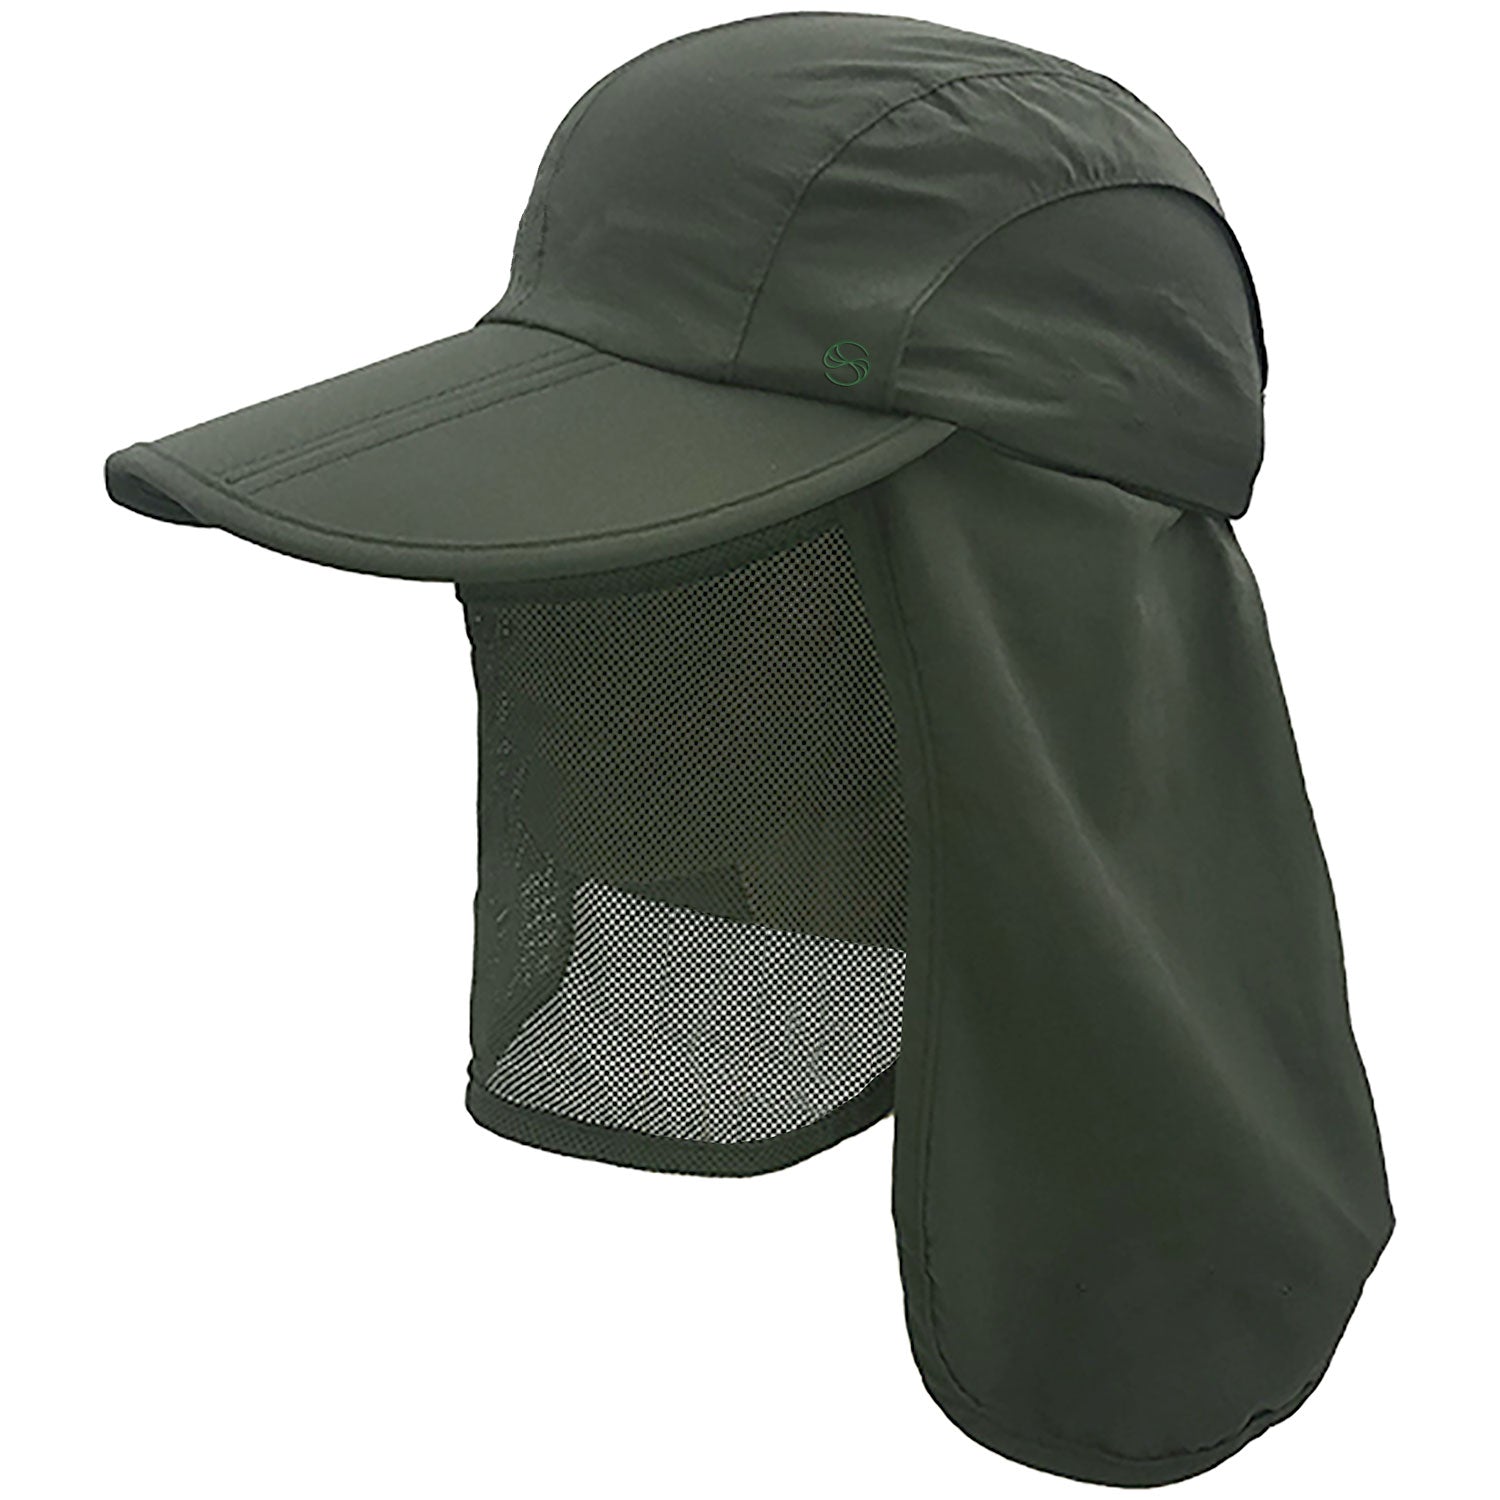 SOBEYO unisex Outdoor Snap Hats Fishing Hiking Boonie Hunting Brim Ear Neck Cover Sun Flap Cap